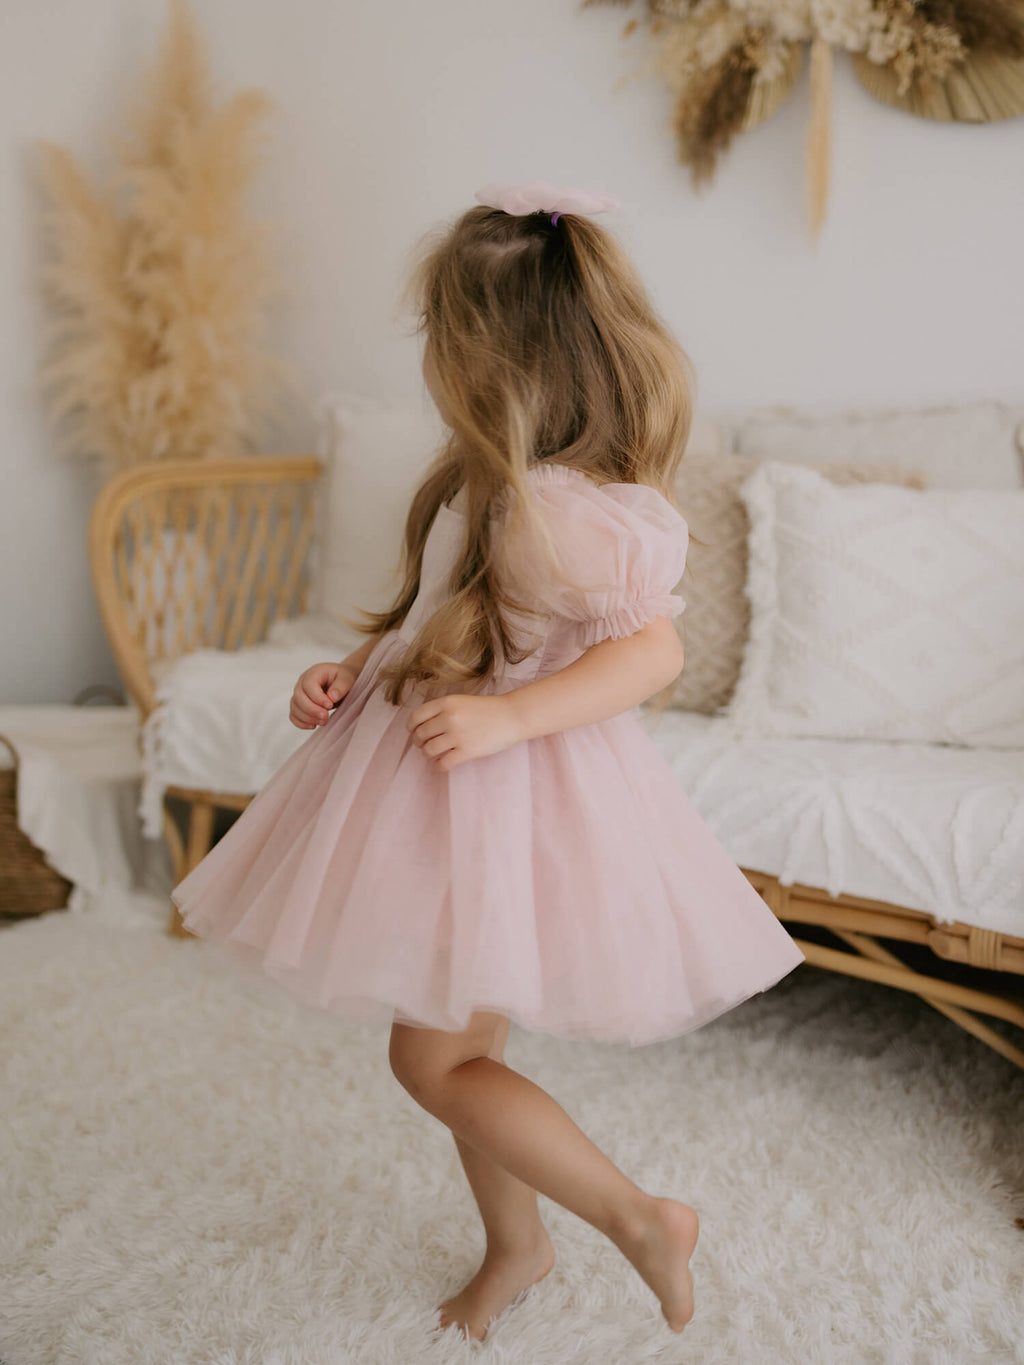 Layla puff sleeve flower girl dress and tulle bow hair clip, both in dusty pink, are worn by a young girl who sits on a rattan couch.